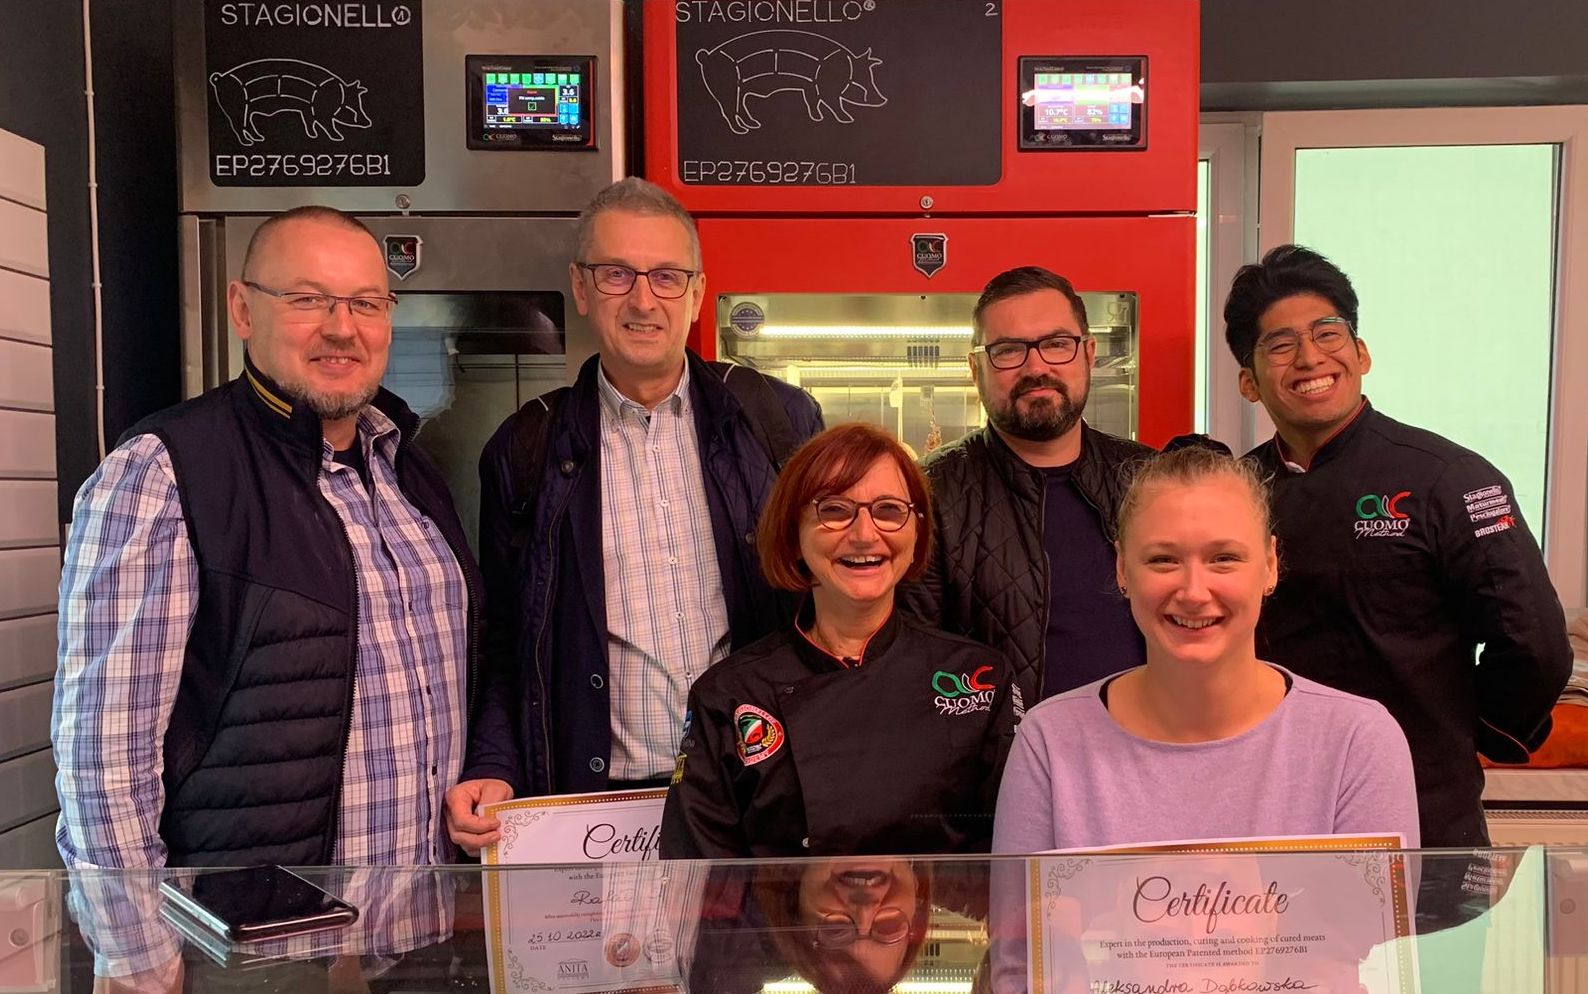 In Bialystok with Chef Maciej and Stagionello® Academy: appreciating the value of tradition amidst Italian and Polish nuances